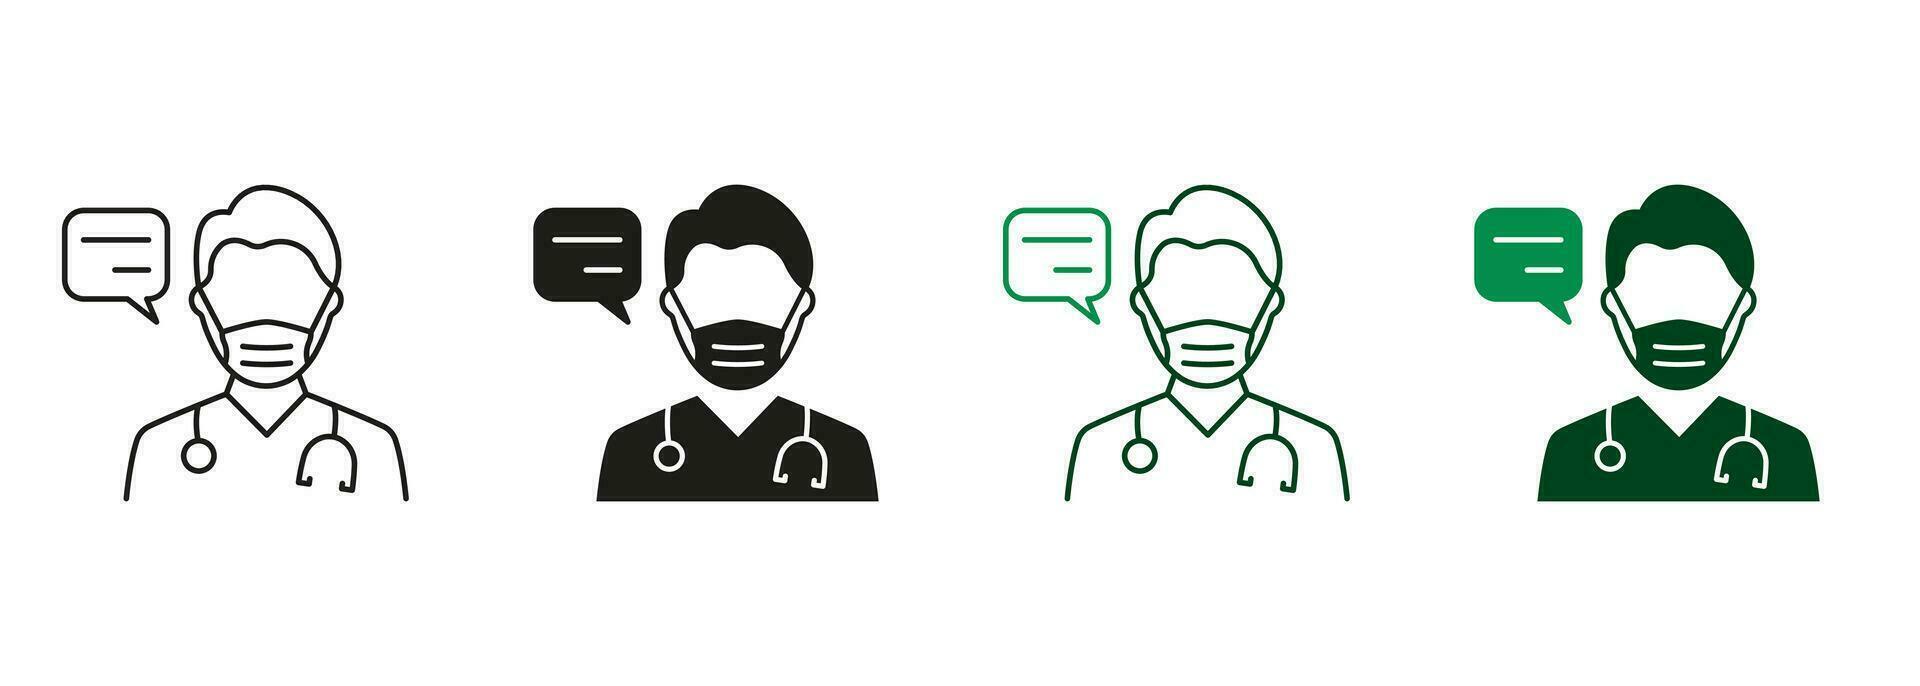 Physician Talking Black and Color Pictogram. Healthcare Chat, Medic Conversation Symbols. Doctor in Mask with Speech Bubble Consultation Line and Silhouette Icon Set. Isolated Vector Illustration.